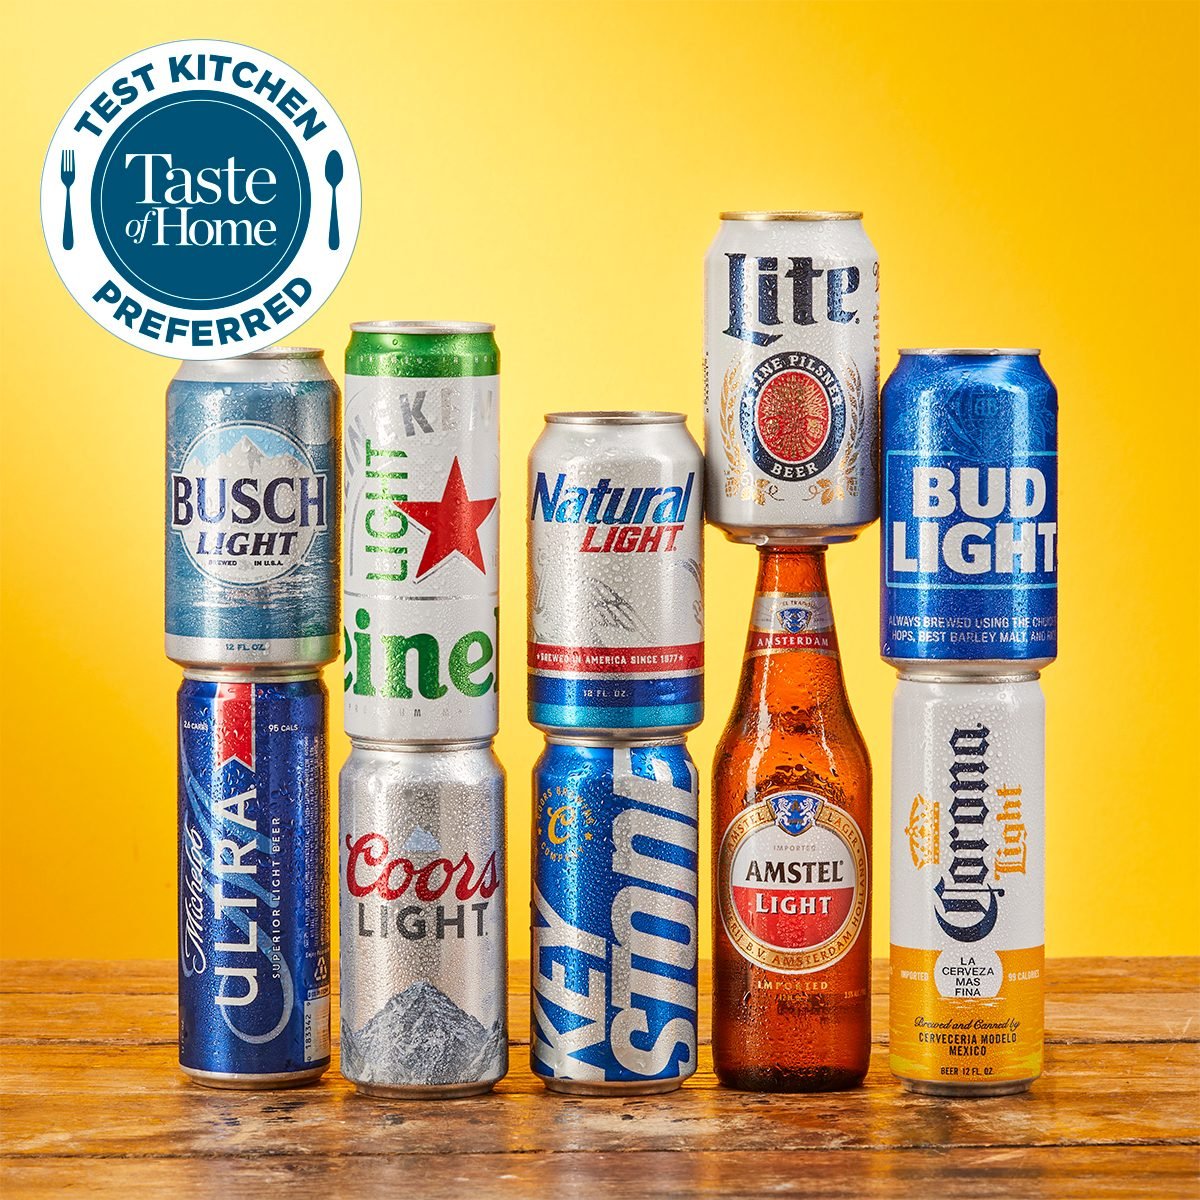 We Tried 10: These Are the Best Light Beer Brands You Can Buy